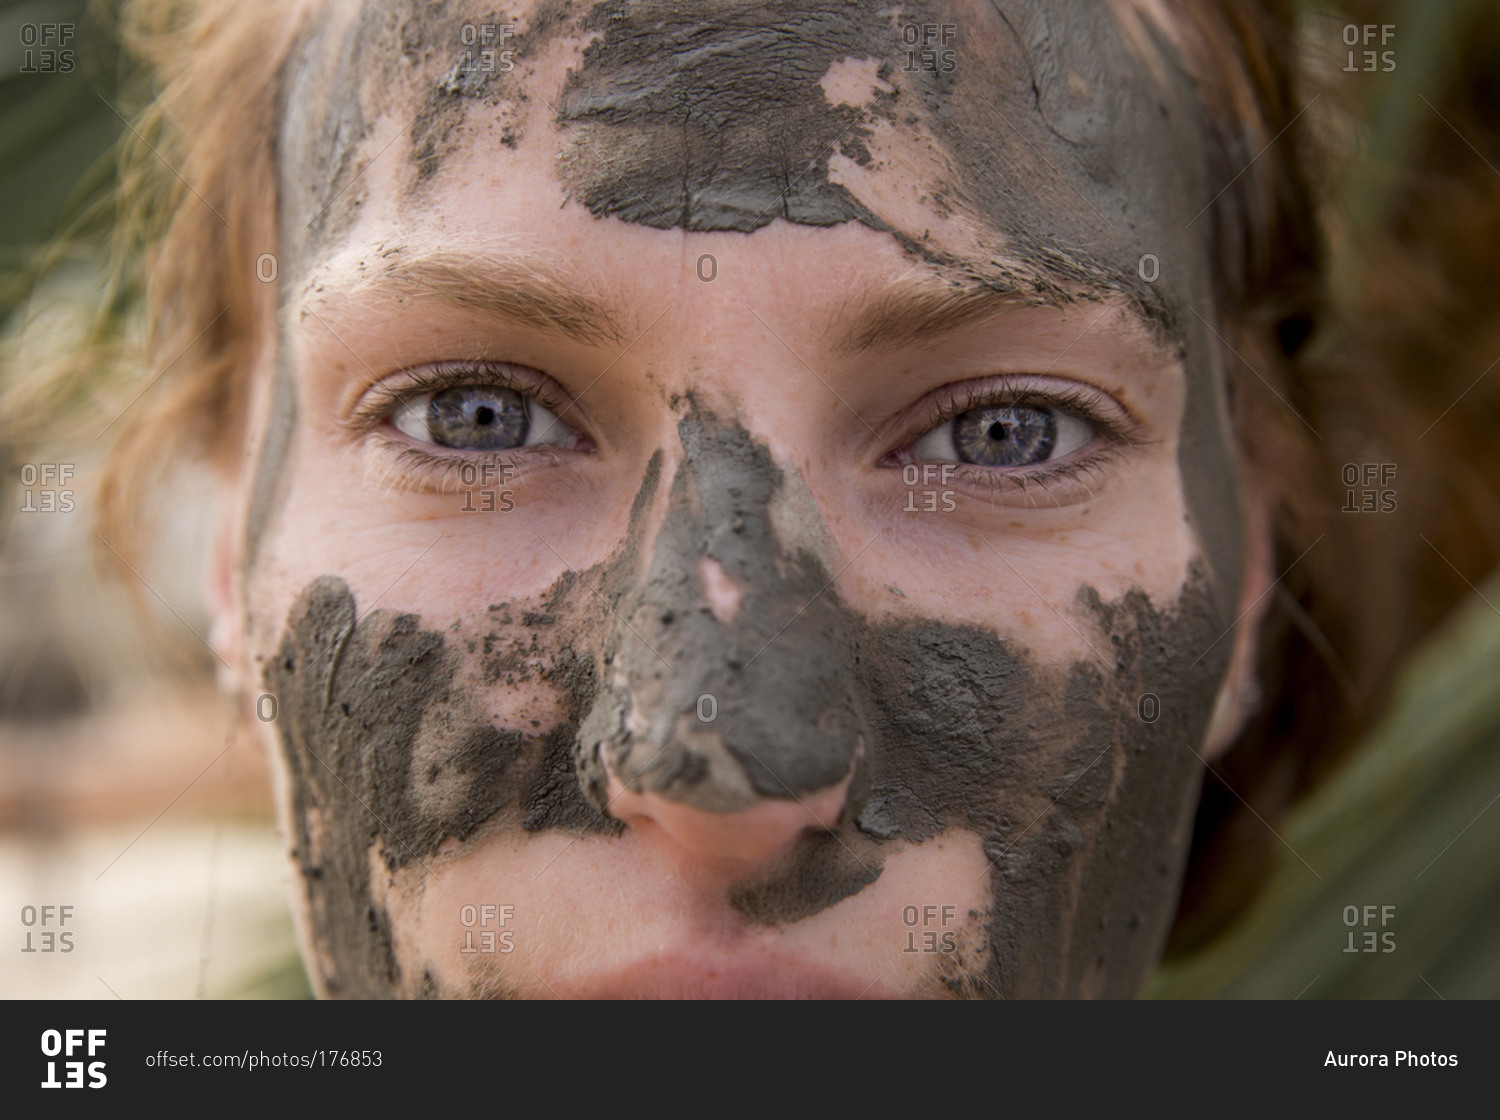 Woman in Mud Mask